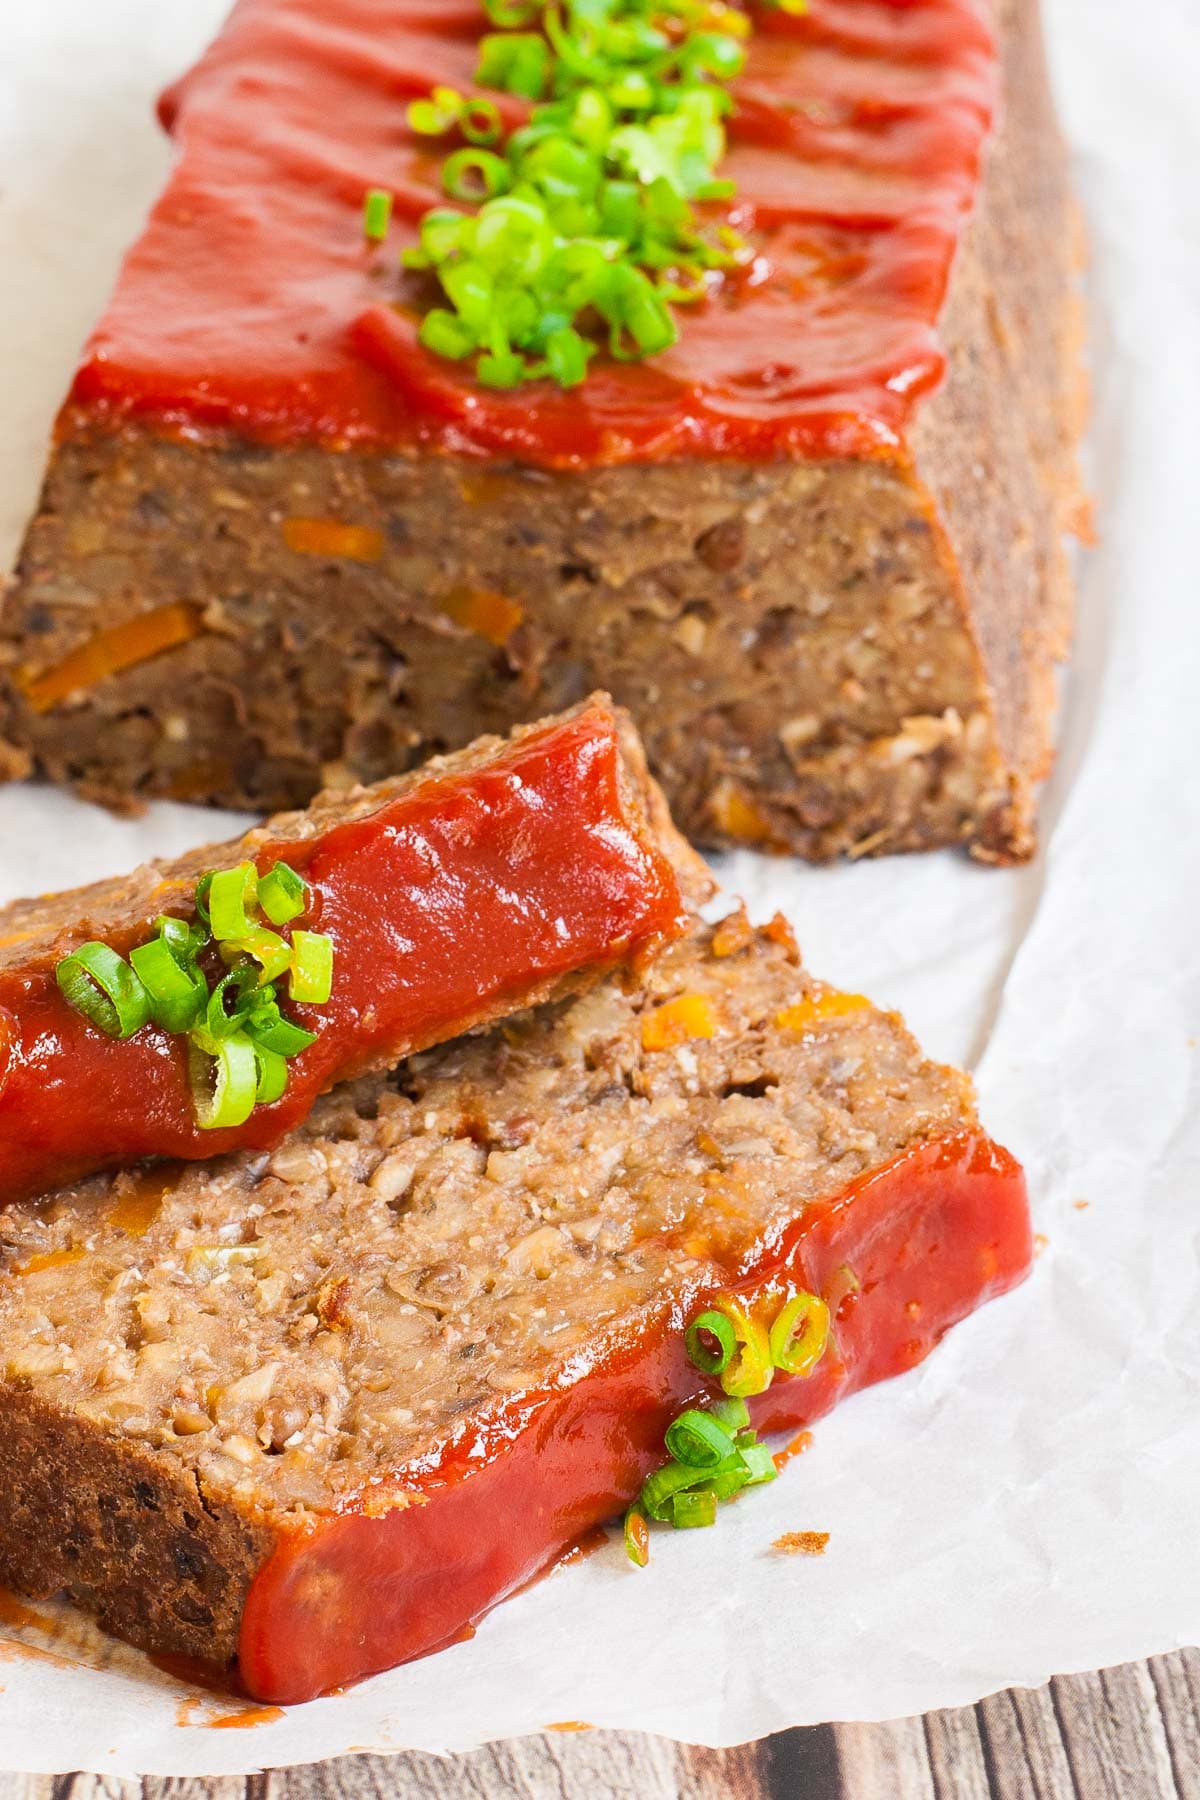 A long brown lentil loaf on parchment paper has been cut into slices. 2 slices has fallen in the front. All slices are glazed with red sauce and topped with chopped scallions.